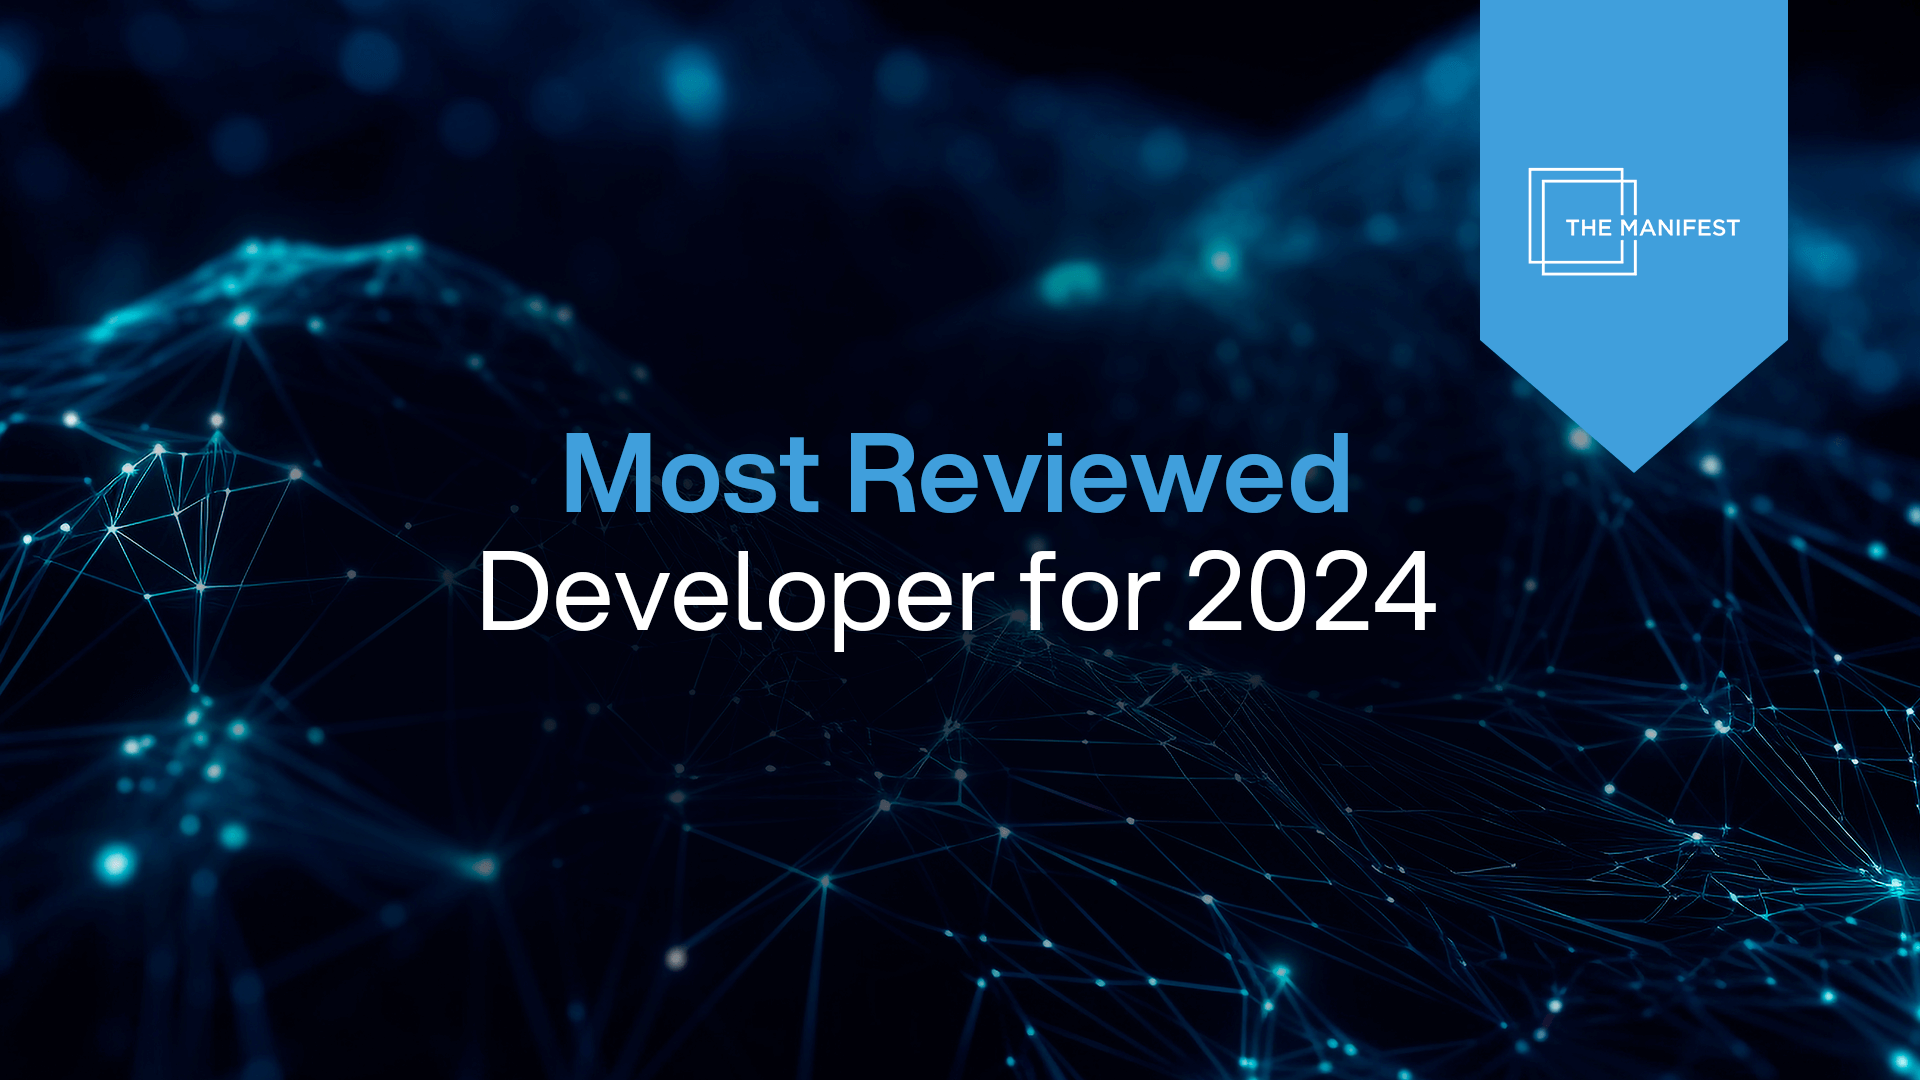 The Manifest hails Luby Software as Brazil's most reviewed developer for 2024.